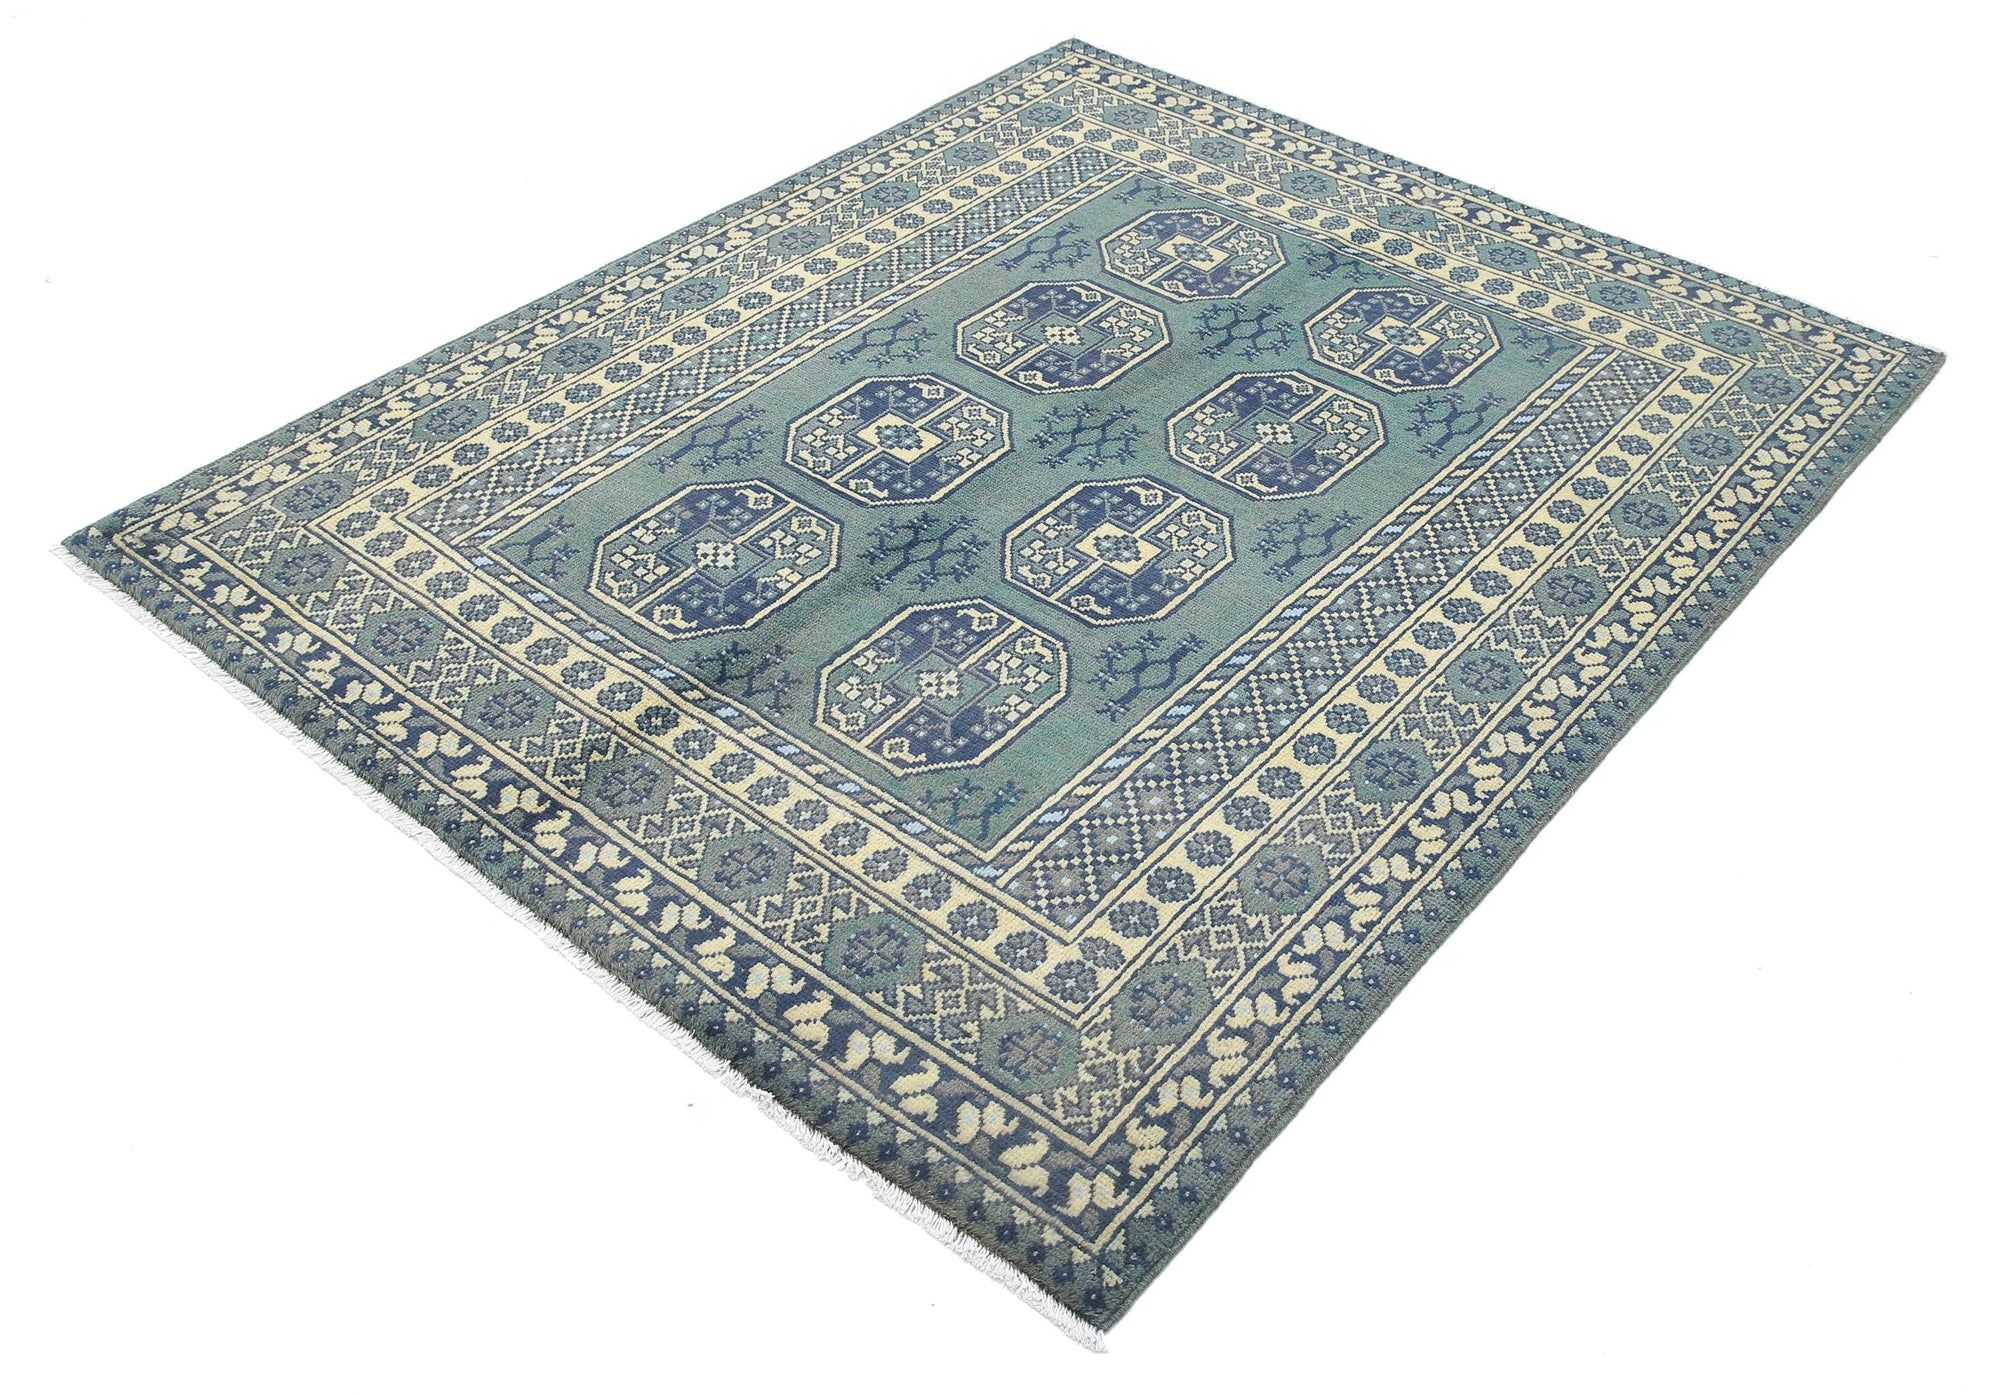 Revival-hand-knotted-gul-collection-wool-rug-5013931-2.jpg